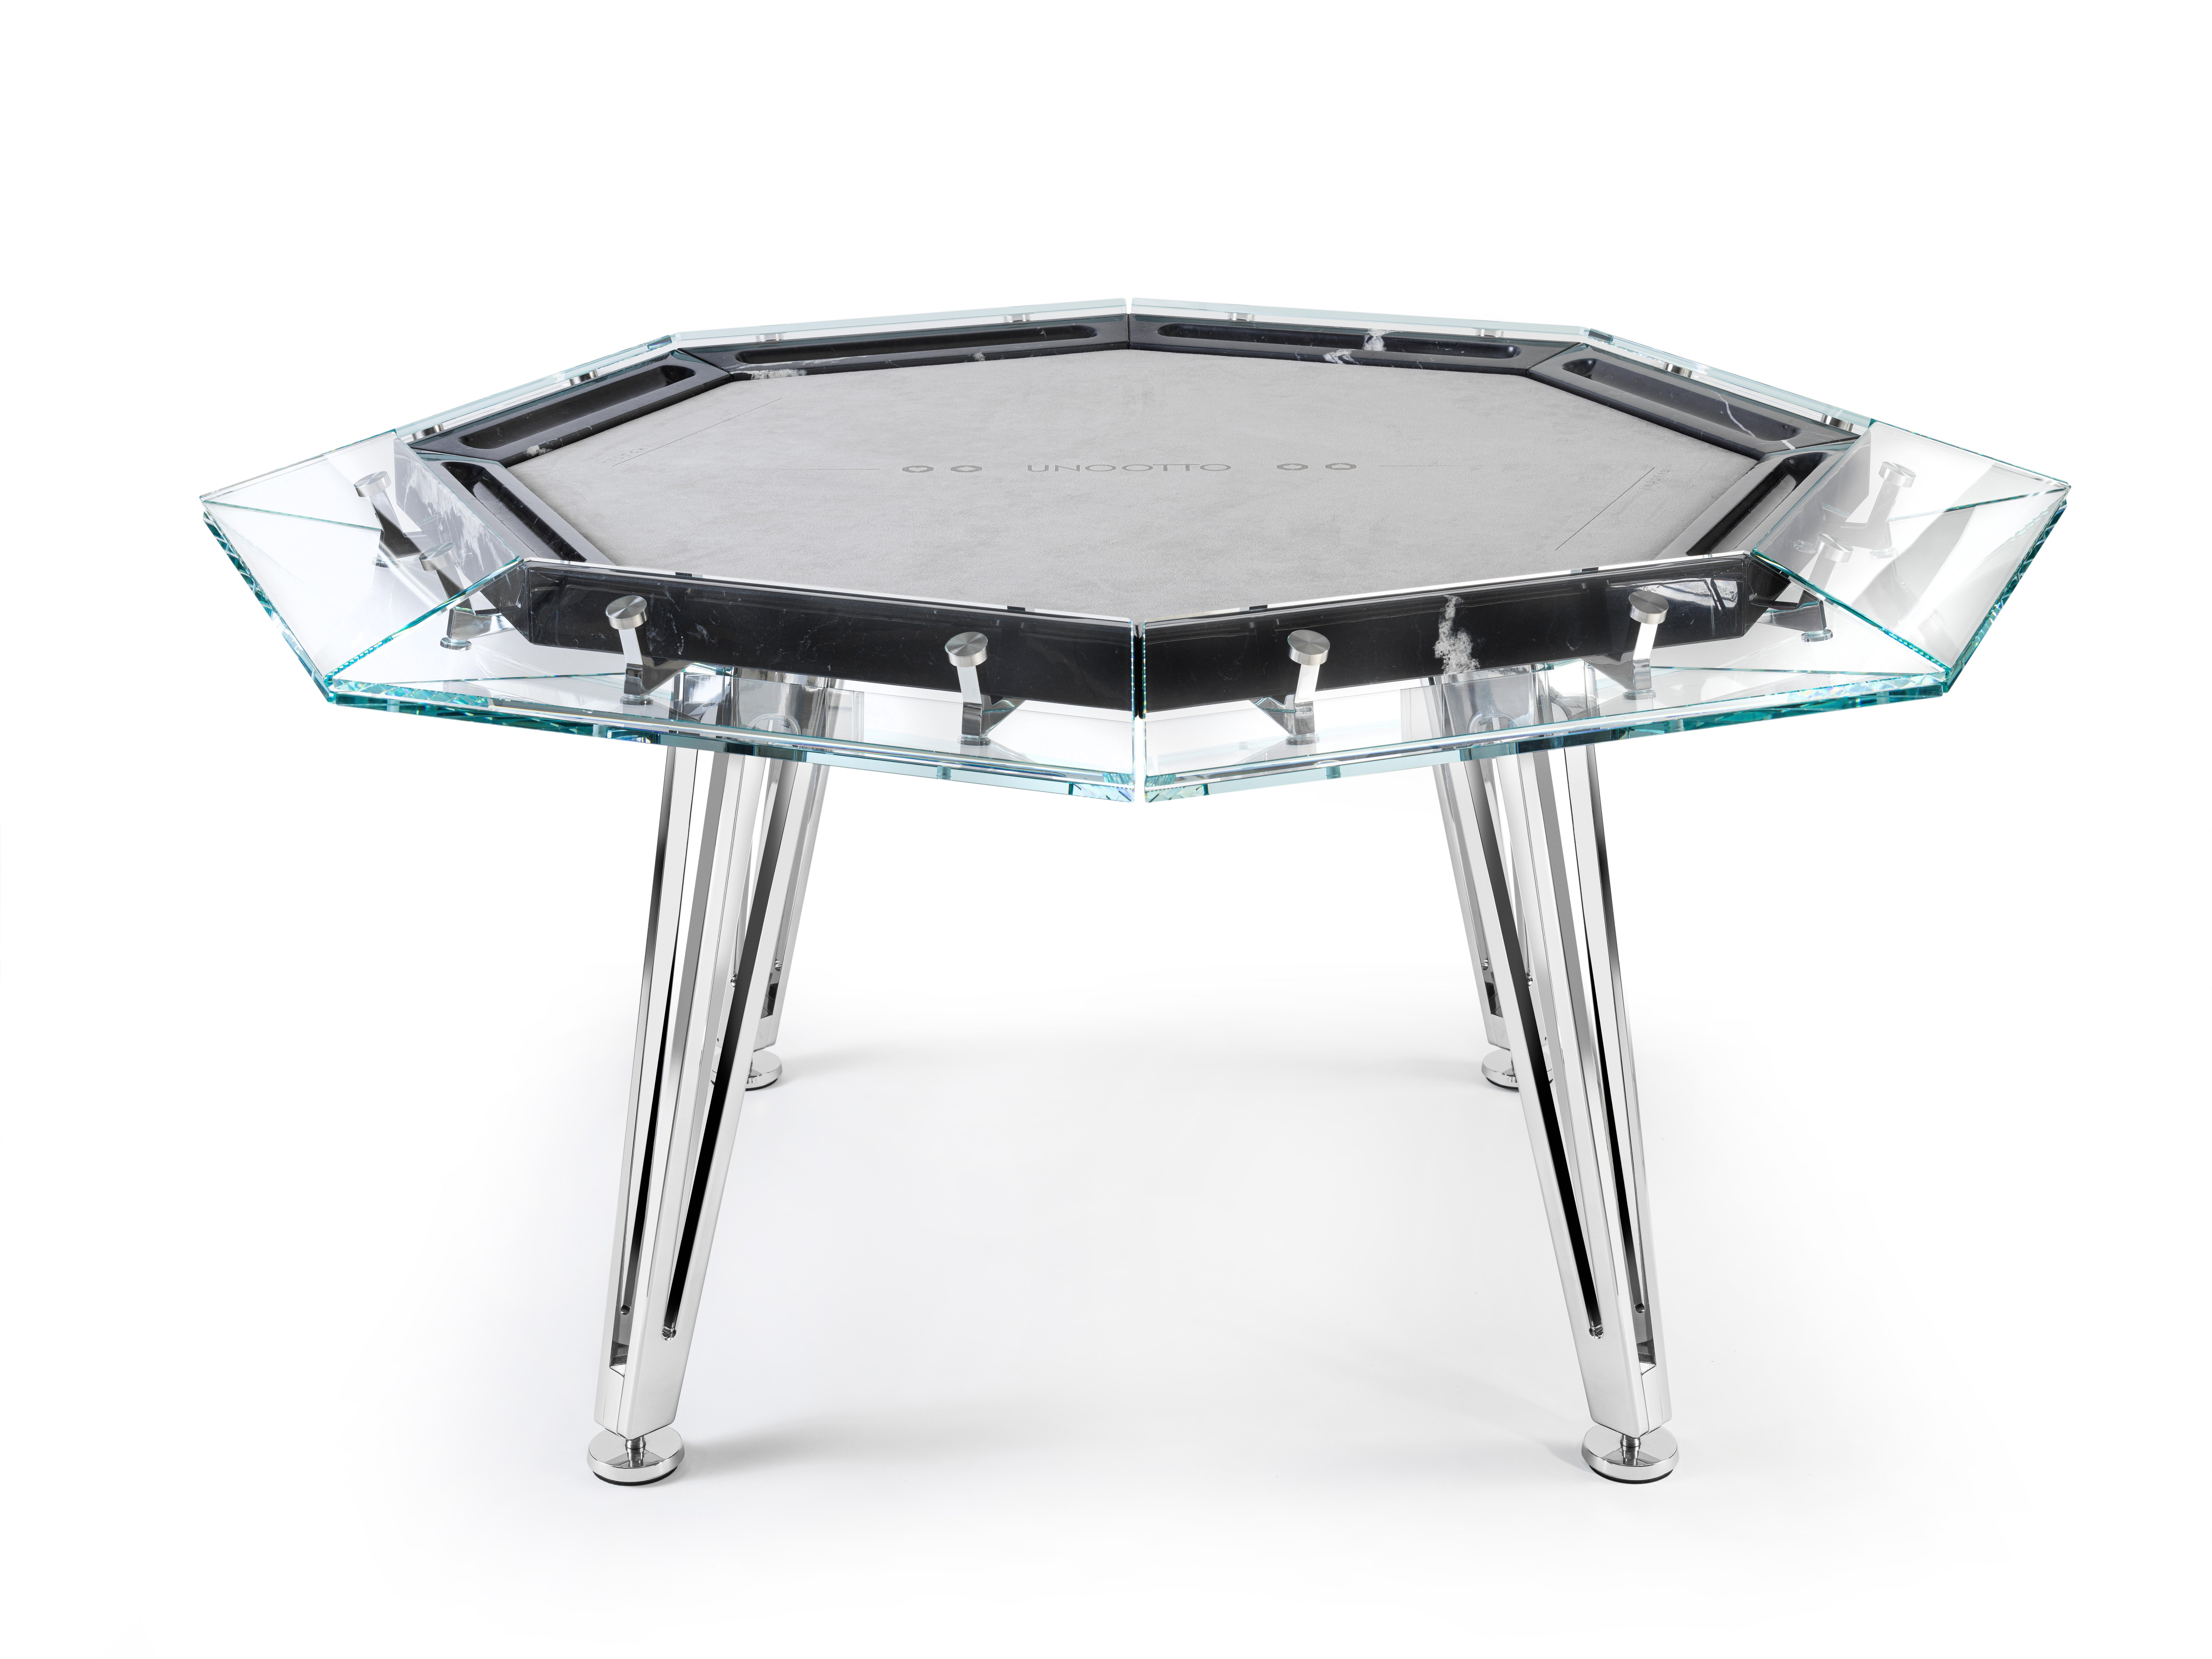 Unootto reinterprets the traditional professional poker table, making the A-game stylish and sophisticated.

This one-of-a-kind octagonal poker table features a unique low-iron glass top edge supported by an inner black marble top, finished off with